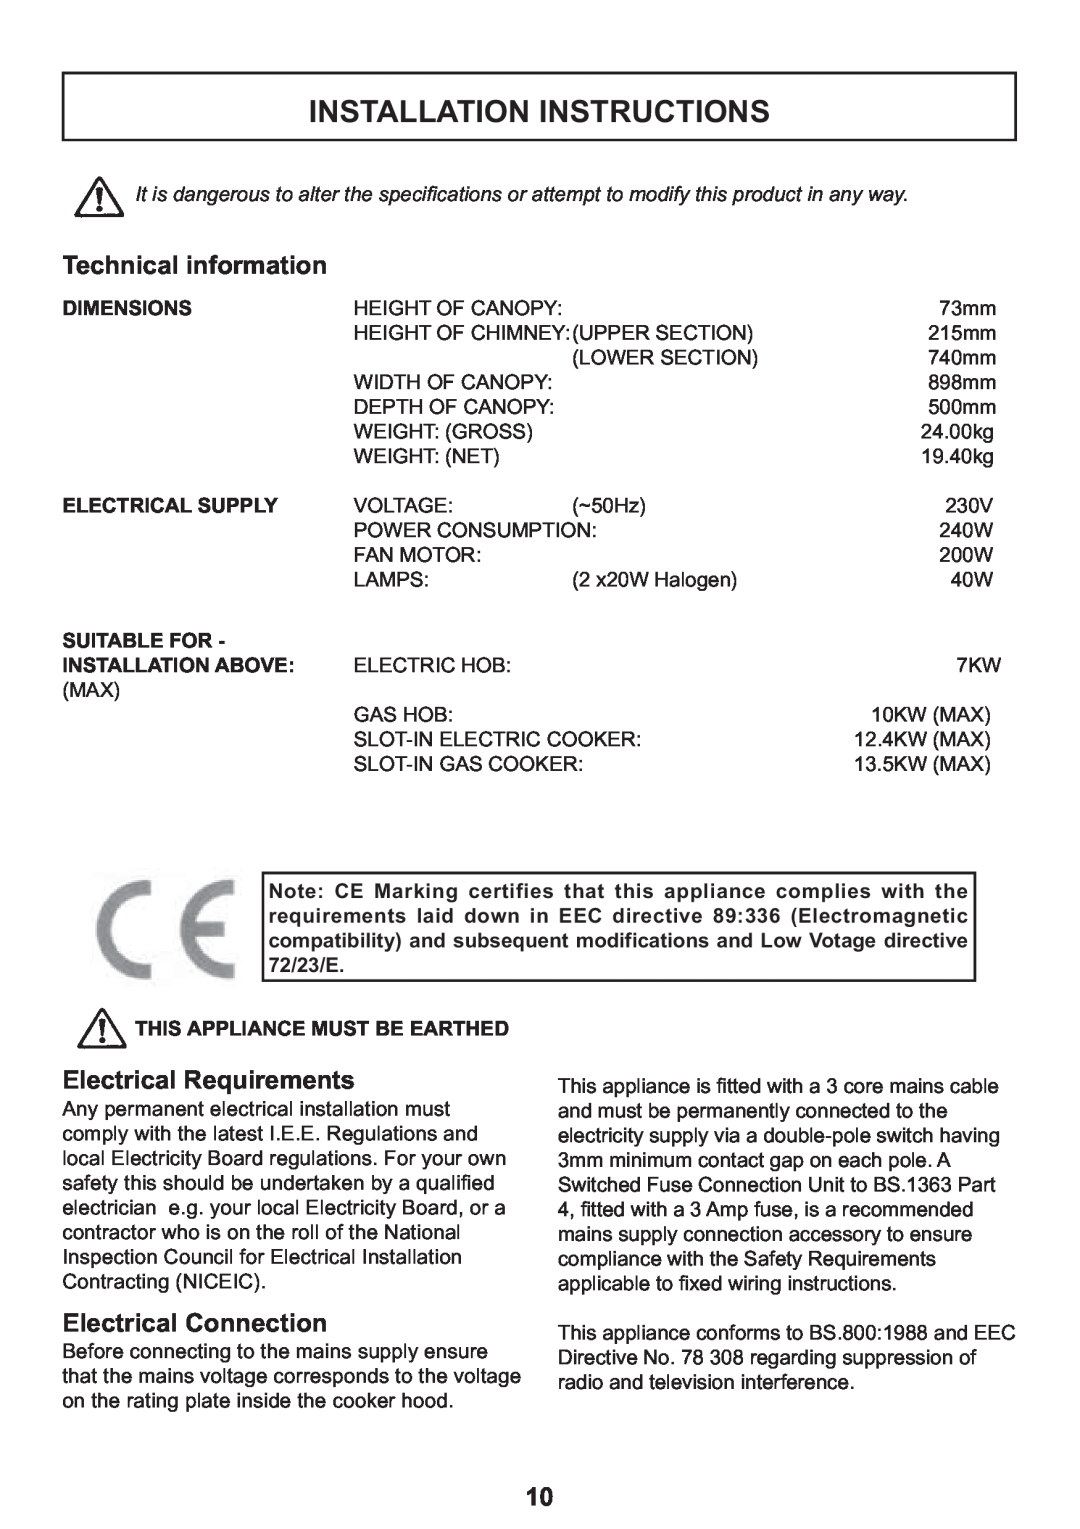 Zanussi ZHC 935 manual Installation Instructions, Technical information, Electrical Requirements, Electrical Connection 